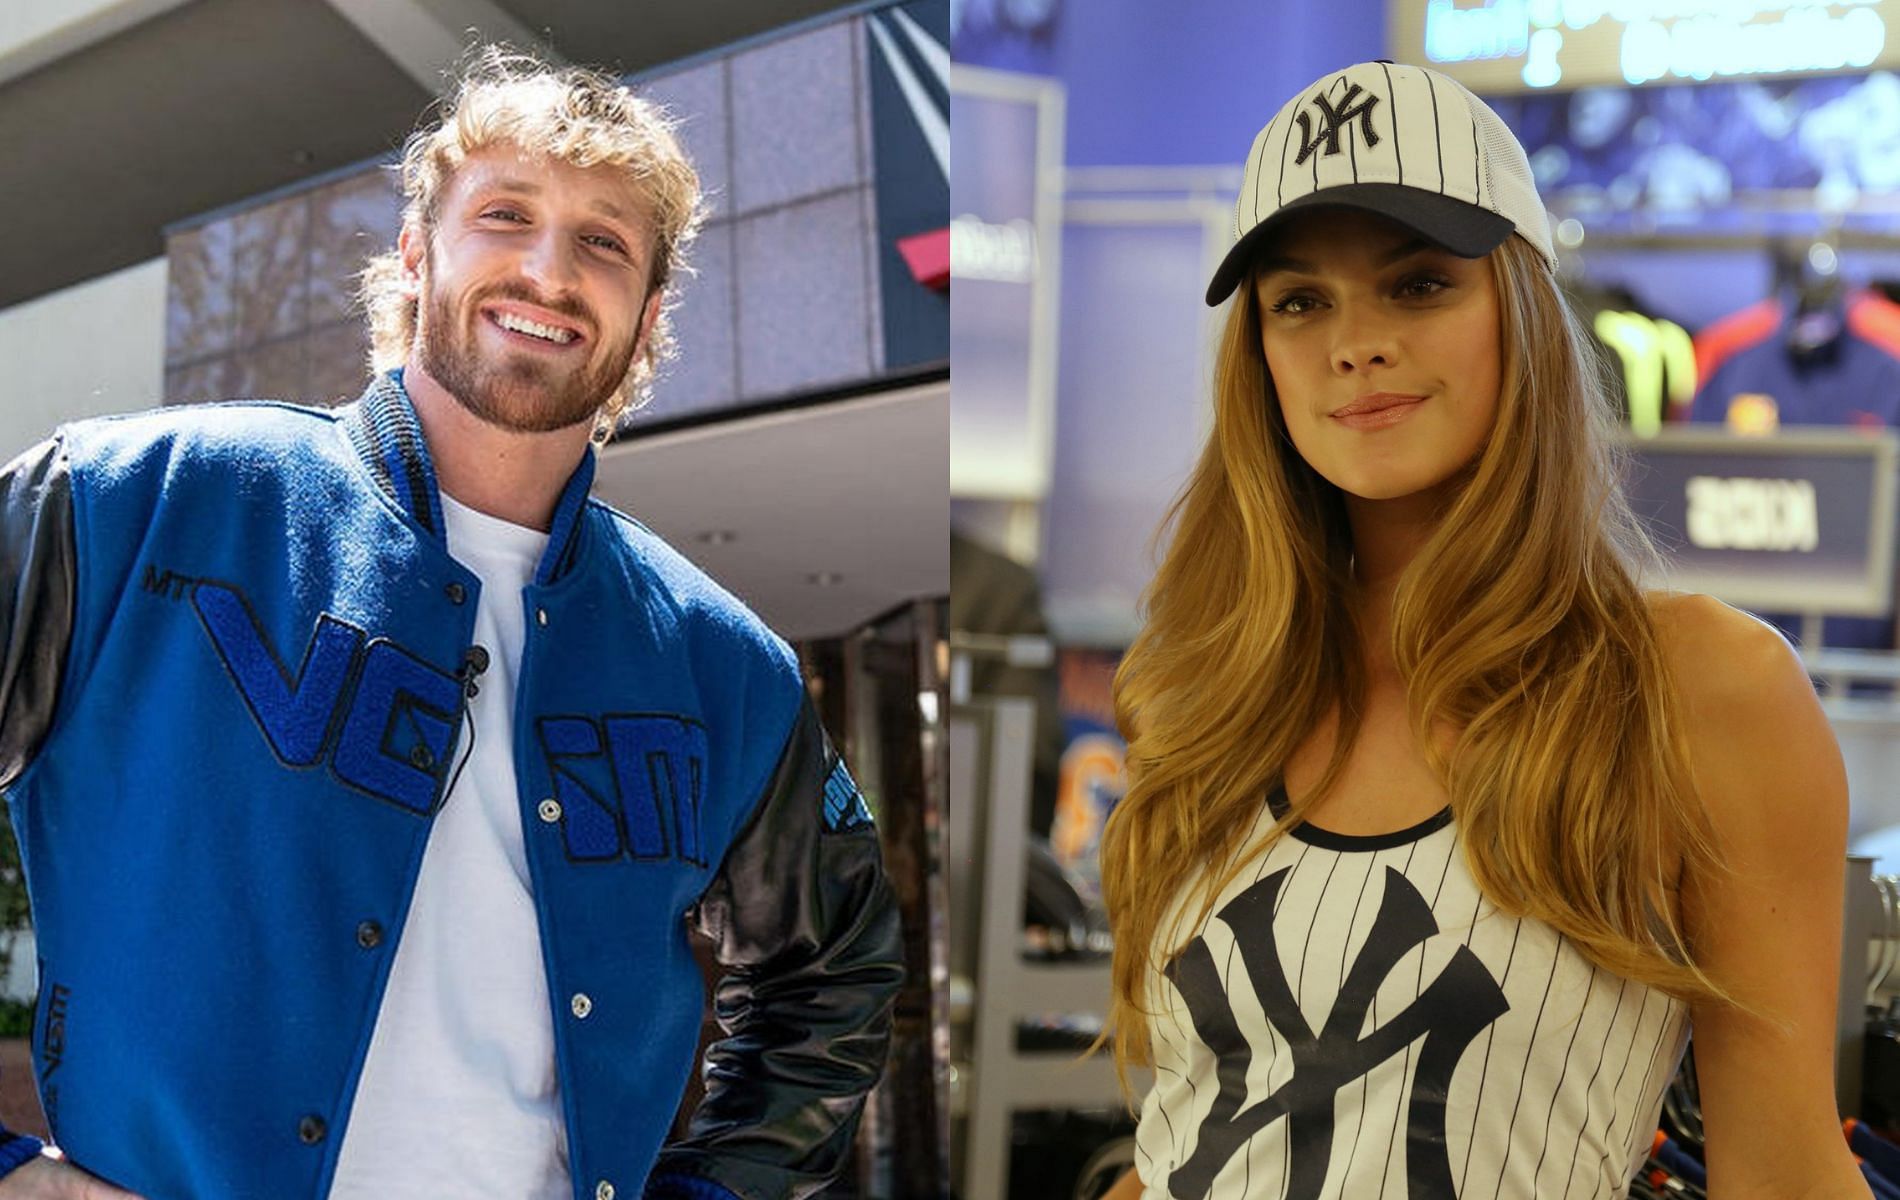 What did Logan Paul say about his supermodel girlfriend?